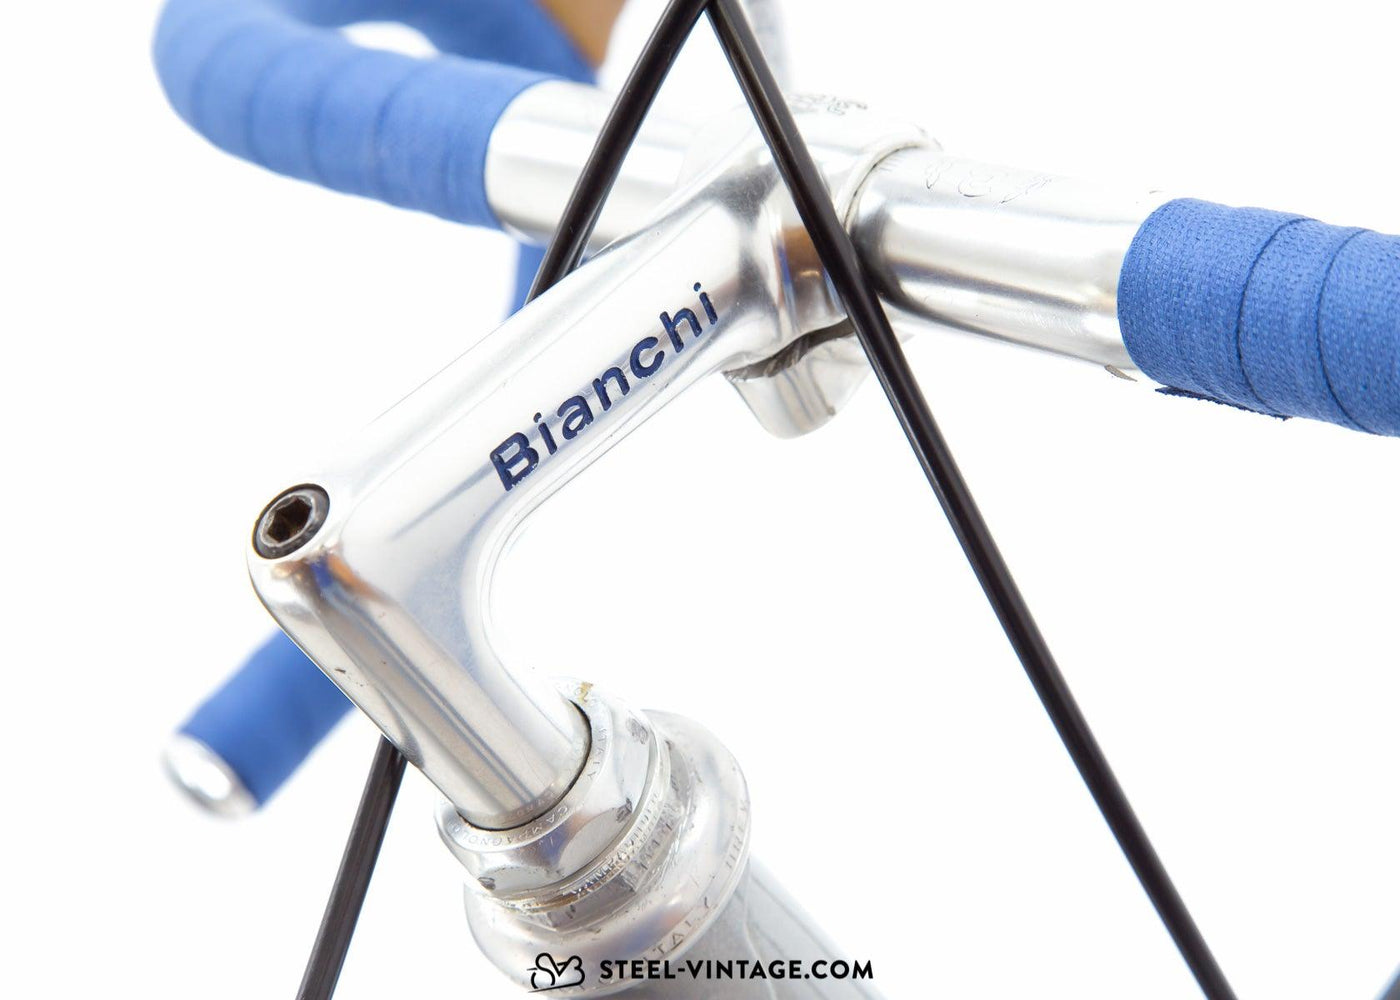 Bianchi Specialissima Griggio Classic Road Bicycle 1980s - Steel Vintage Bikes